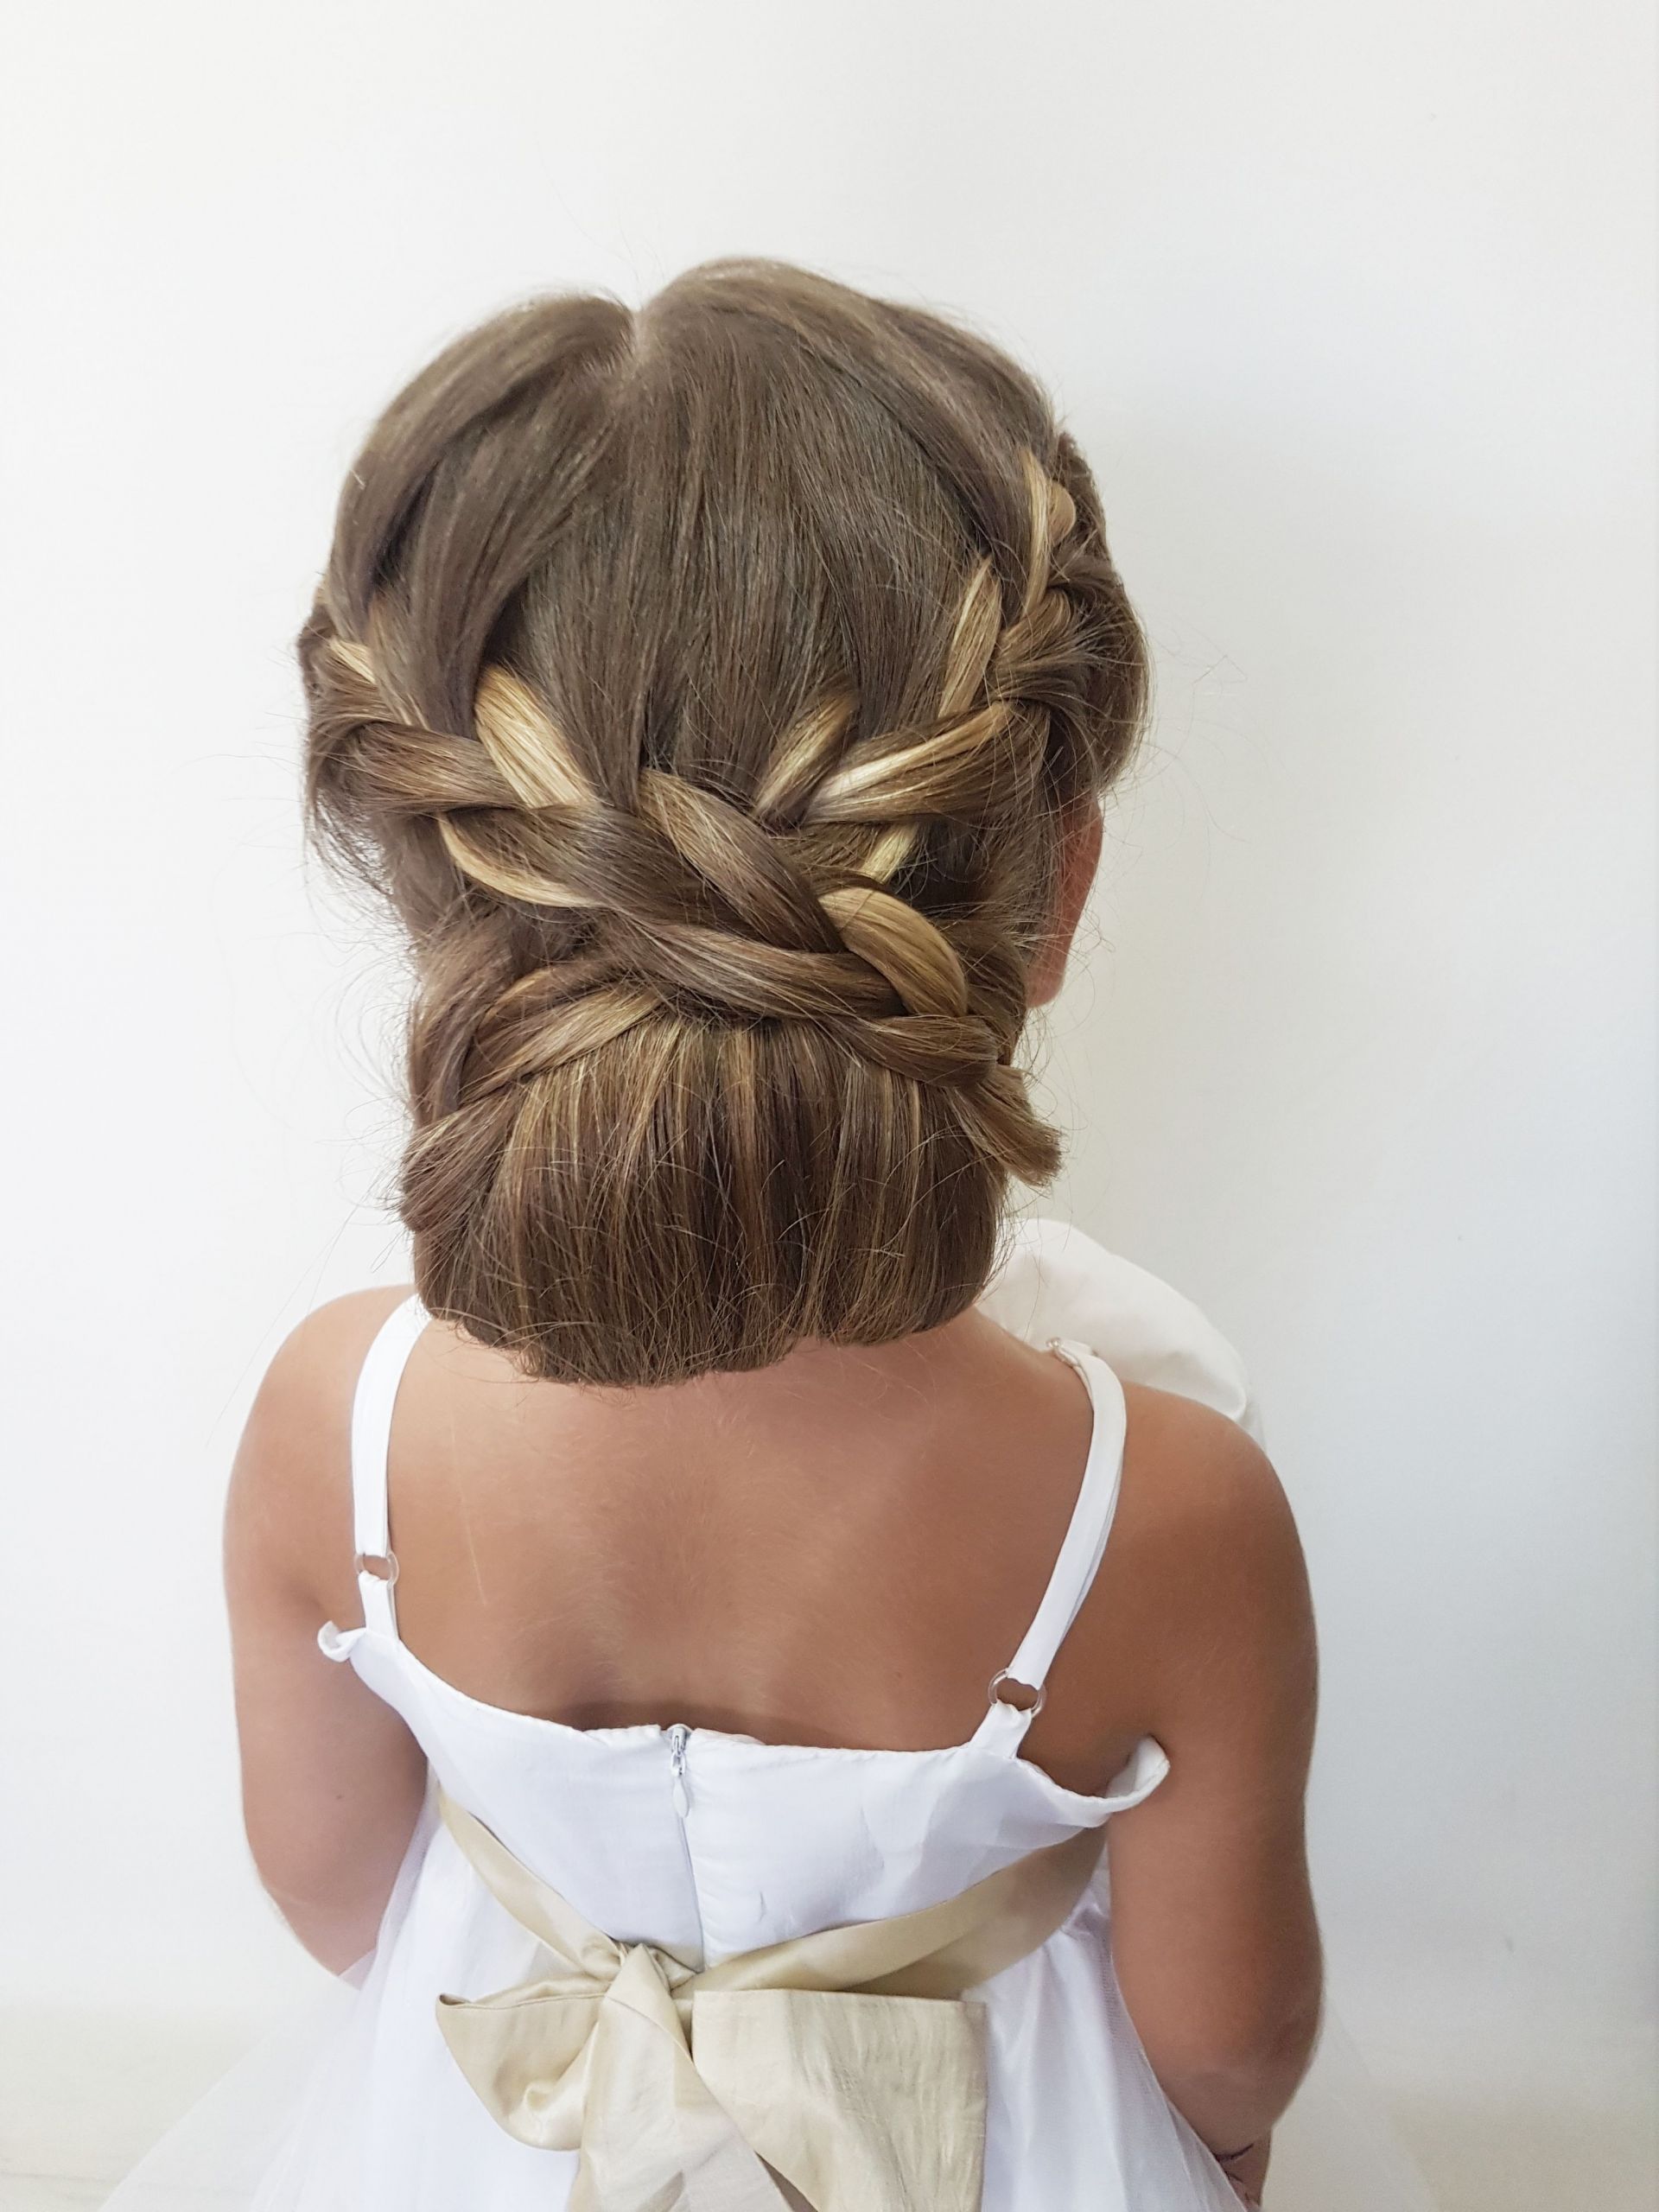 Kids Hairstyles For Wedding
 Pin by Kennedy Libengood on Hair&Beauty